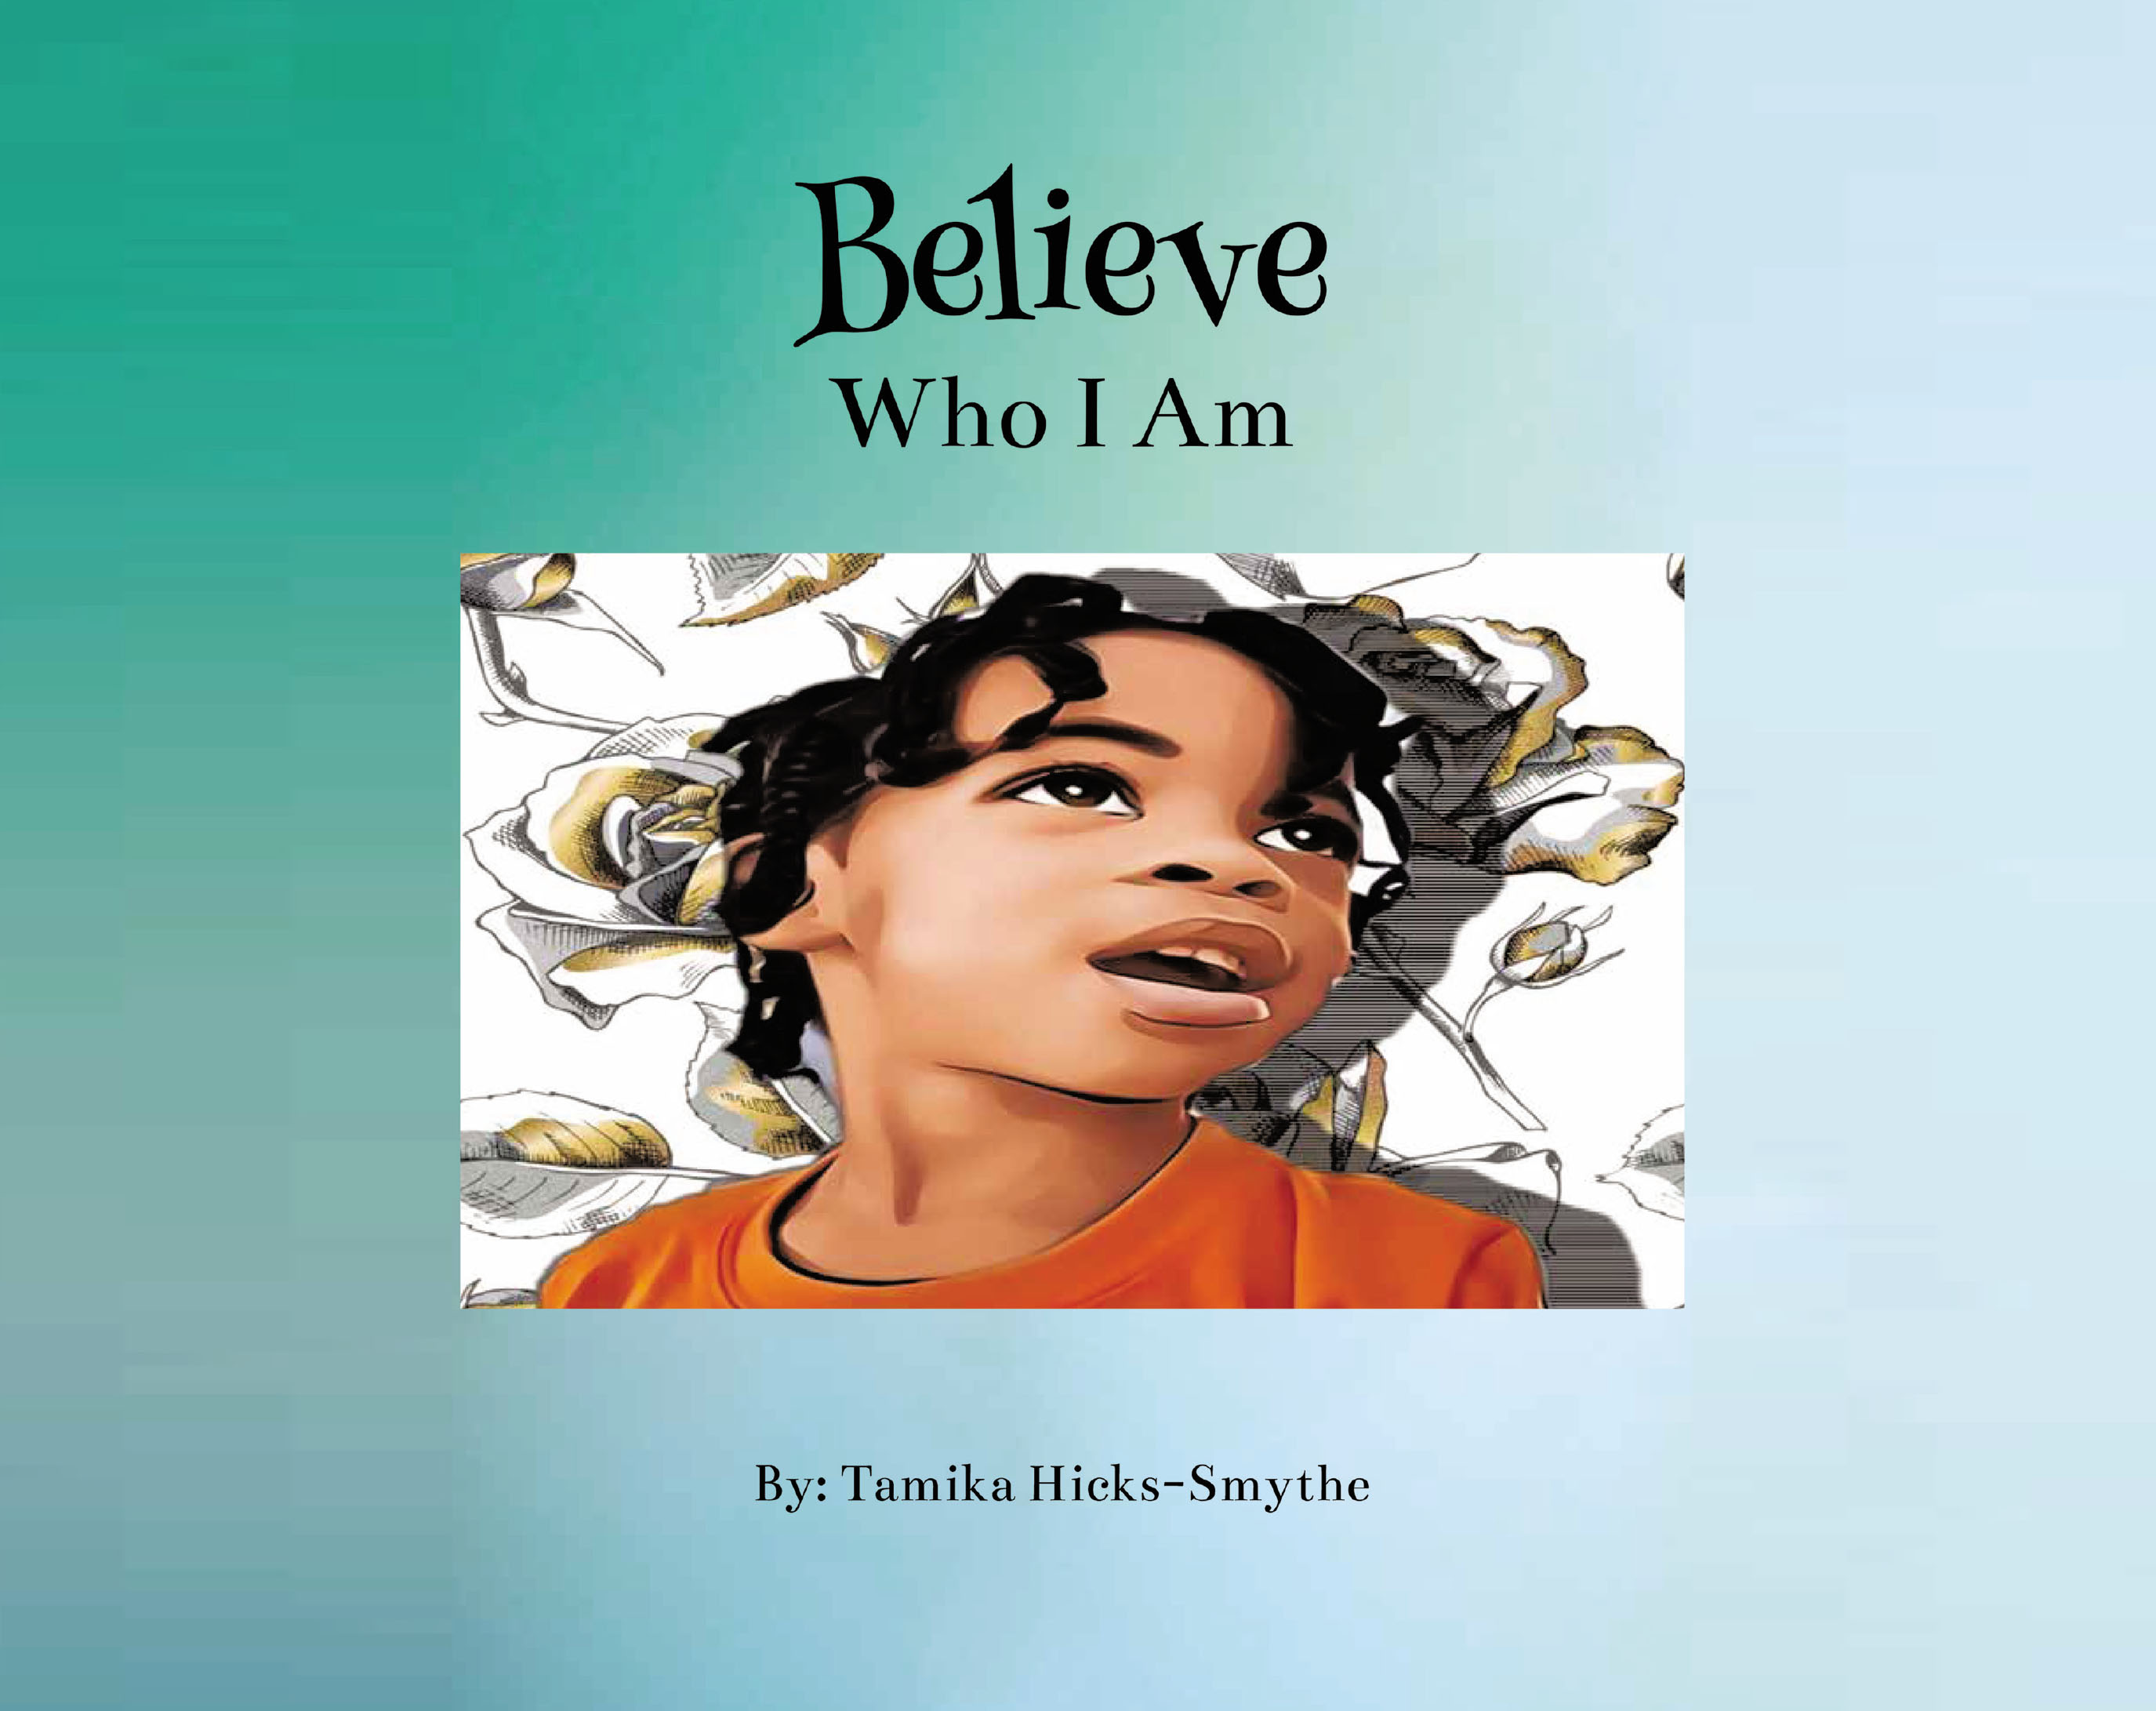 Tamika Hicks-Smythe’s New Book, "Believe: Who I Am," is a Beautiful Story That Emphasizes the Importance of Being Proud of and Loving One's Truest Self